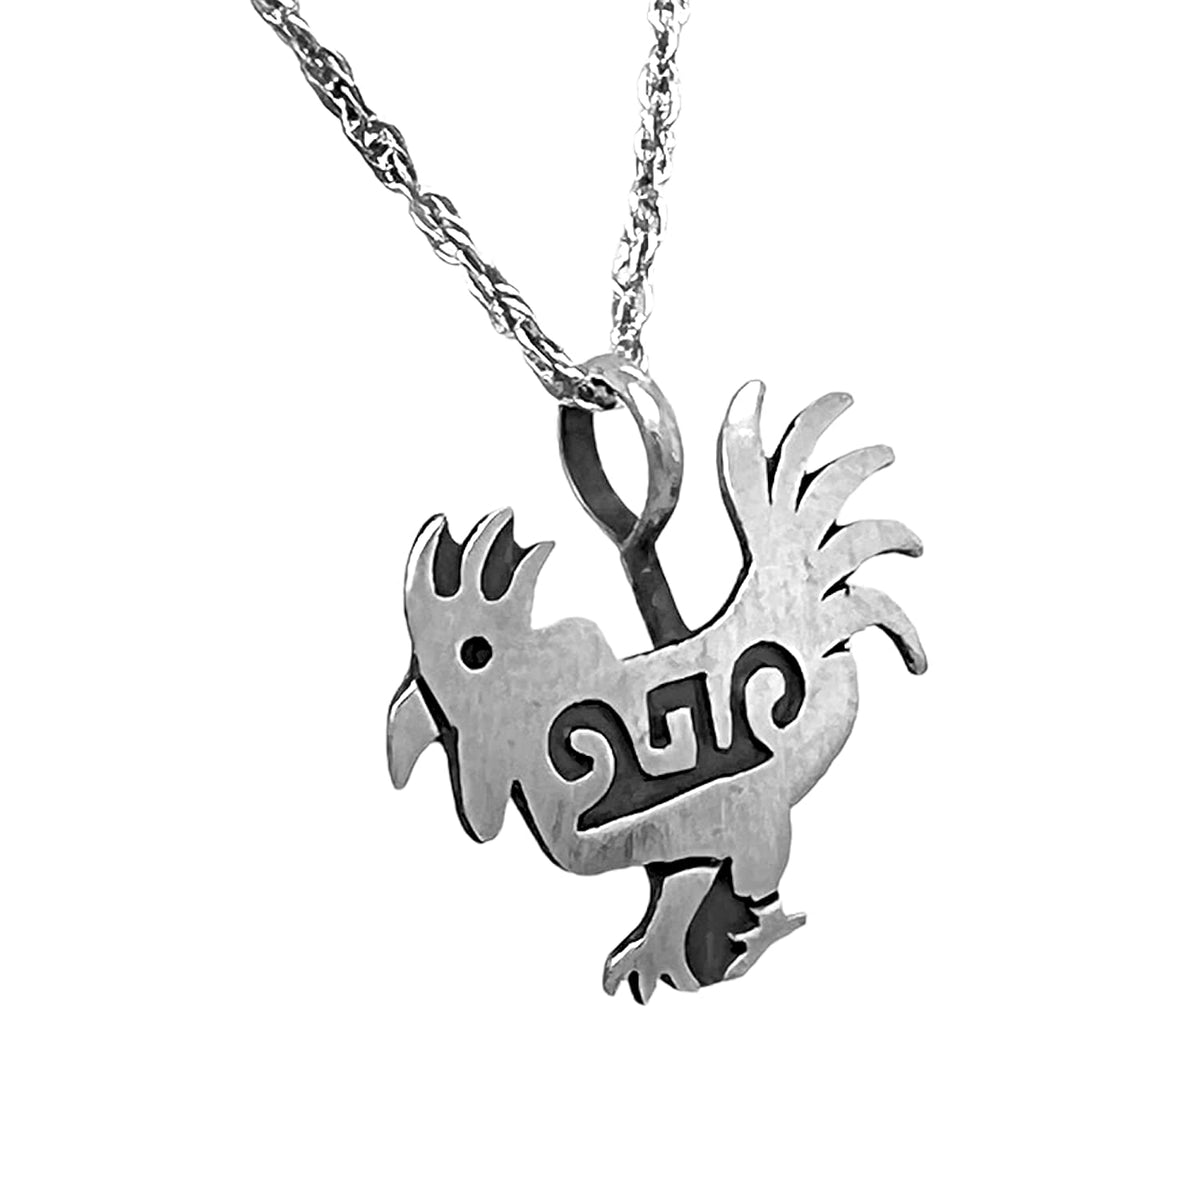 Genuine Sterling Silver Rooster Necklace, Pendant and Chain Set, 925 Sterling Silver, Native American USA Handmade, Nickel Free